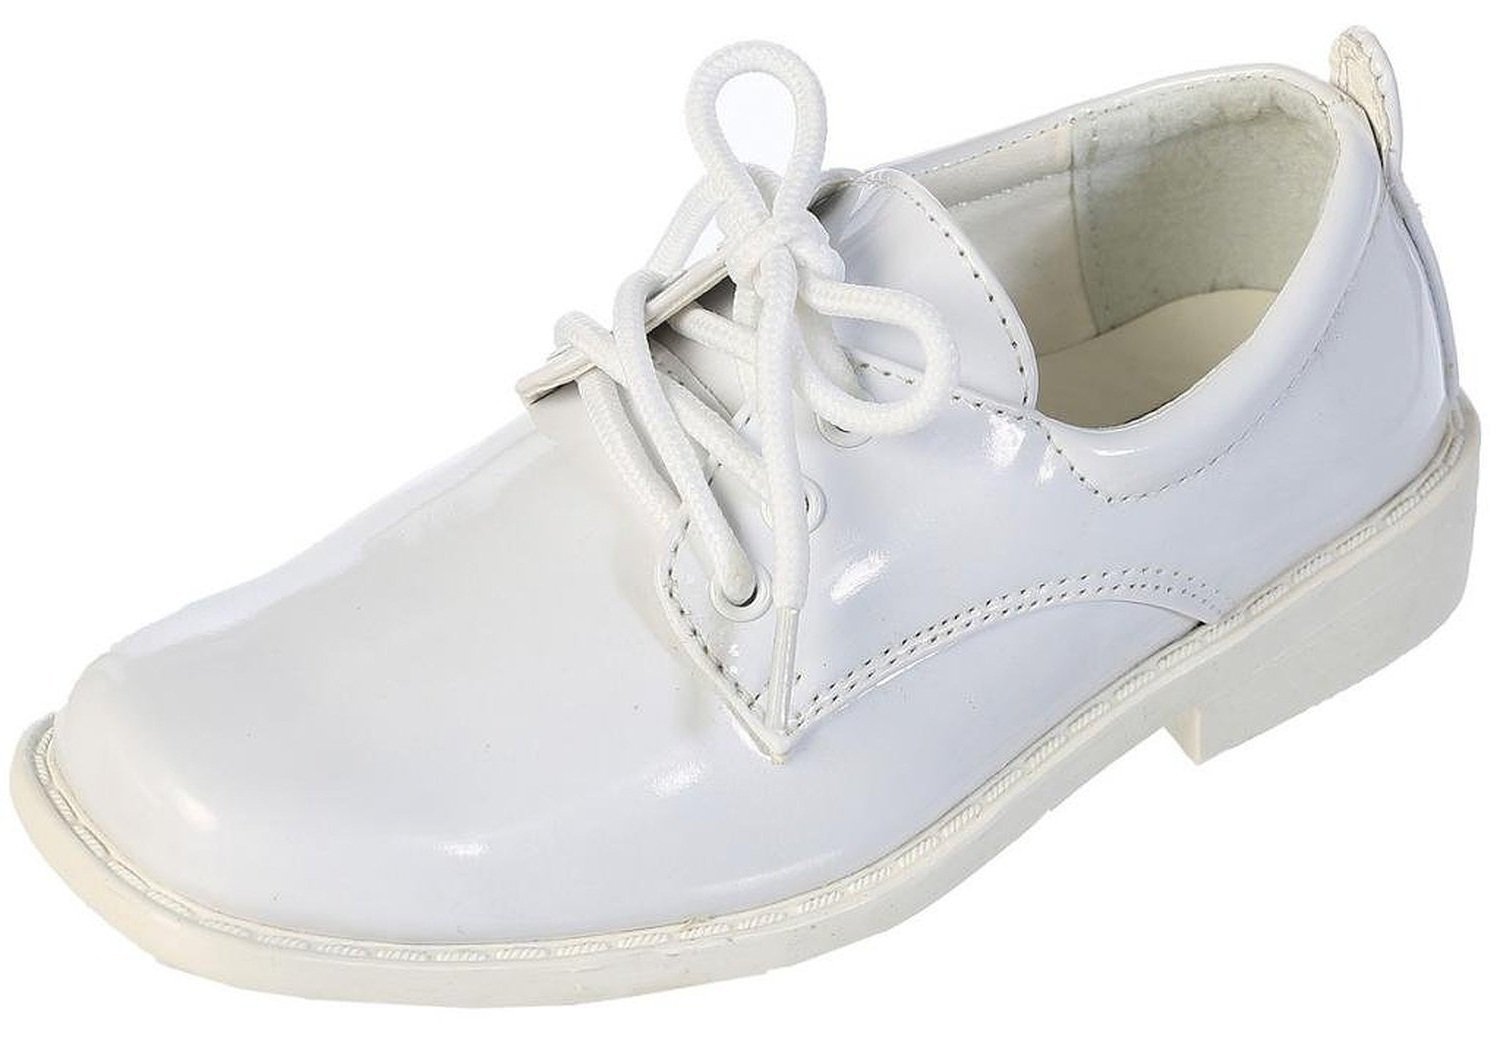 Boys Square Toe Lace Up Oxford Patent Dress Shoes - Available in White 6 Toddler